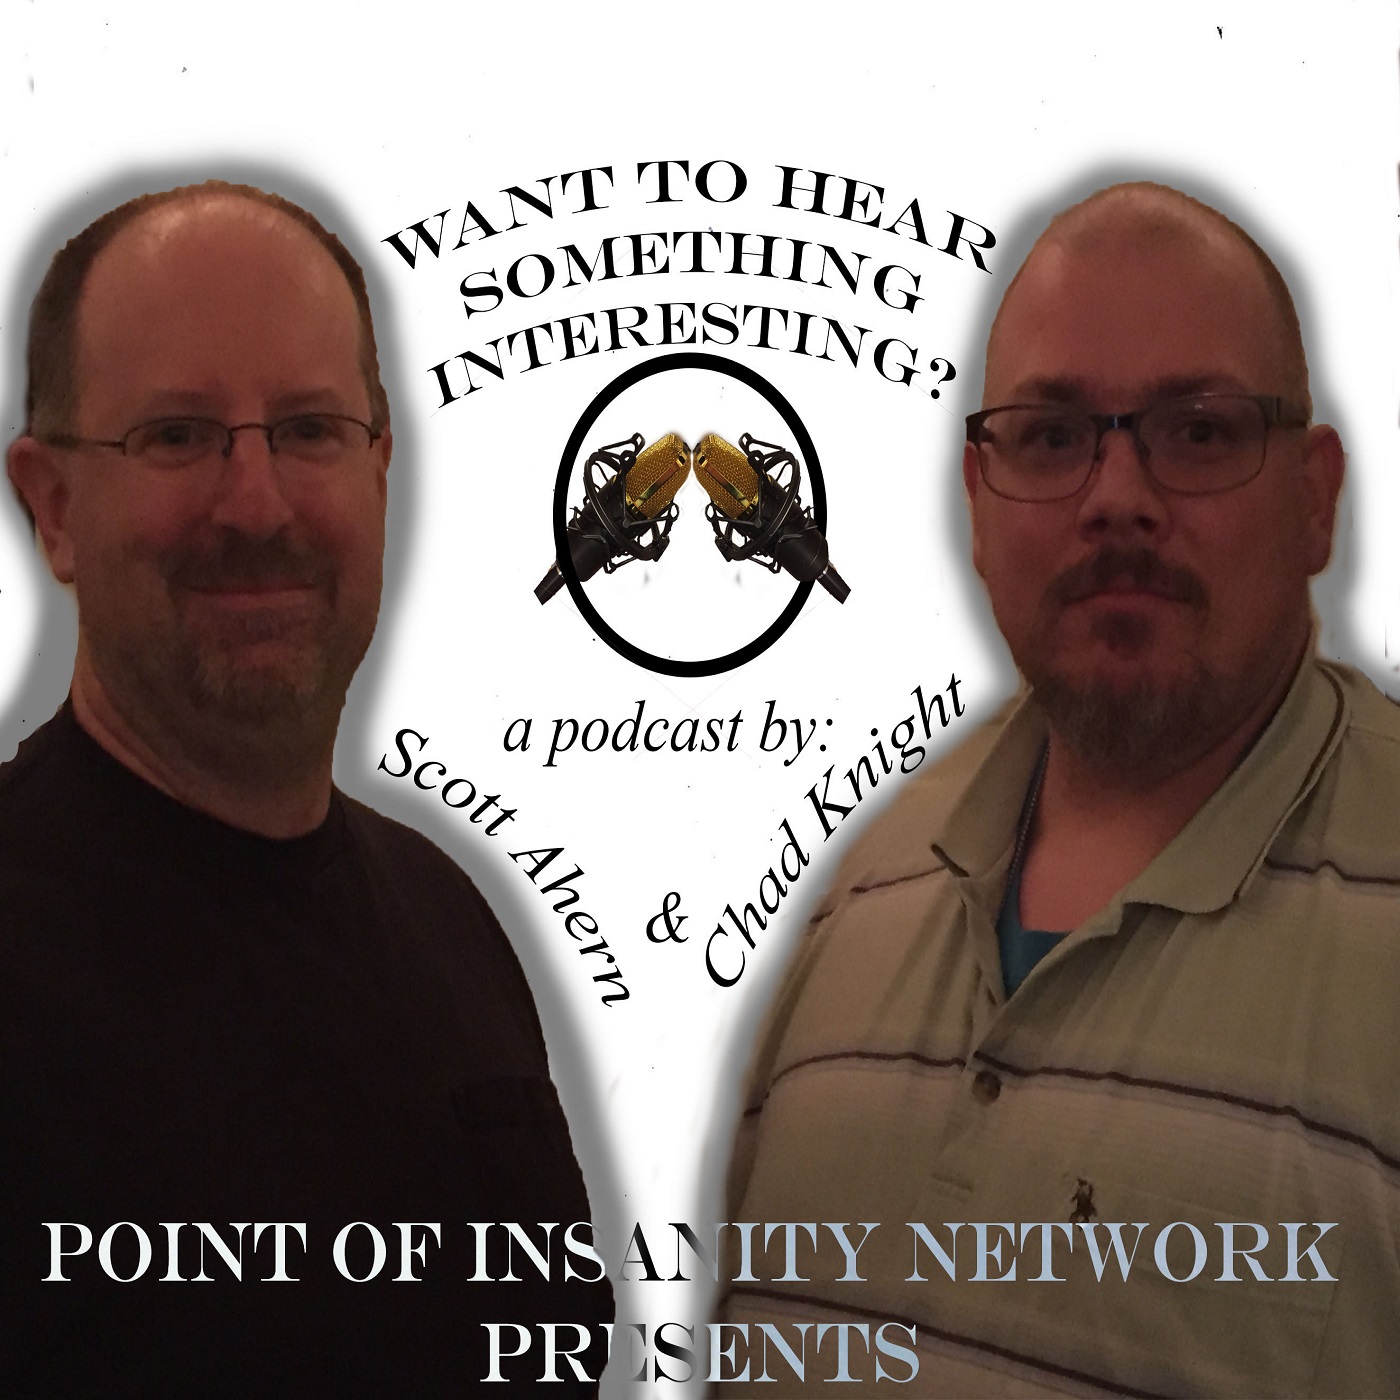 Want to Hear Something Interesting? - Episode 17 - Year Round Schooling